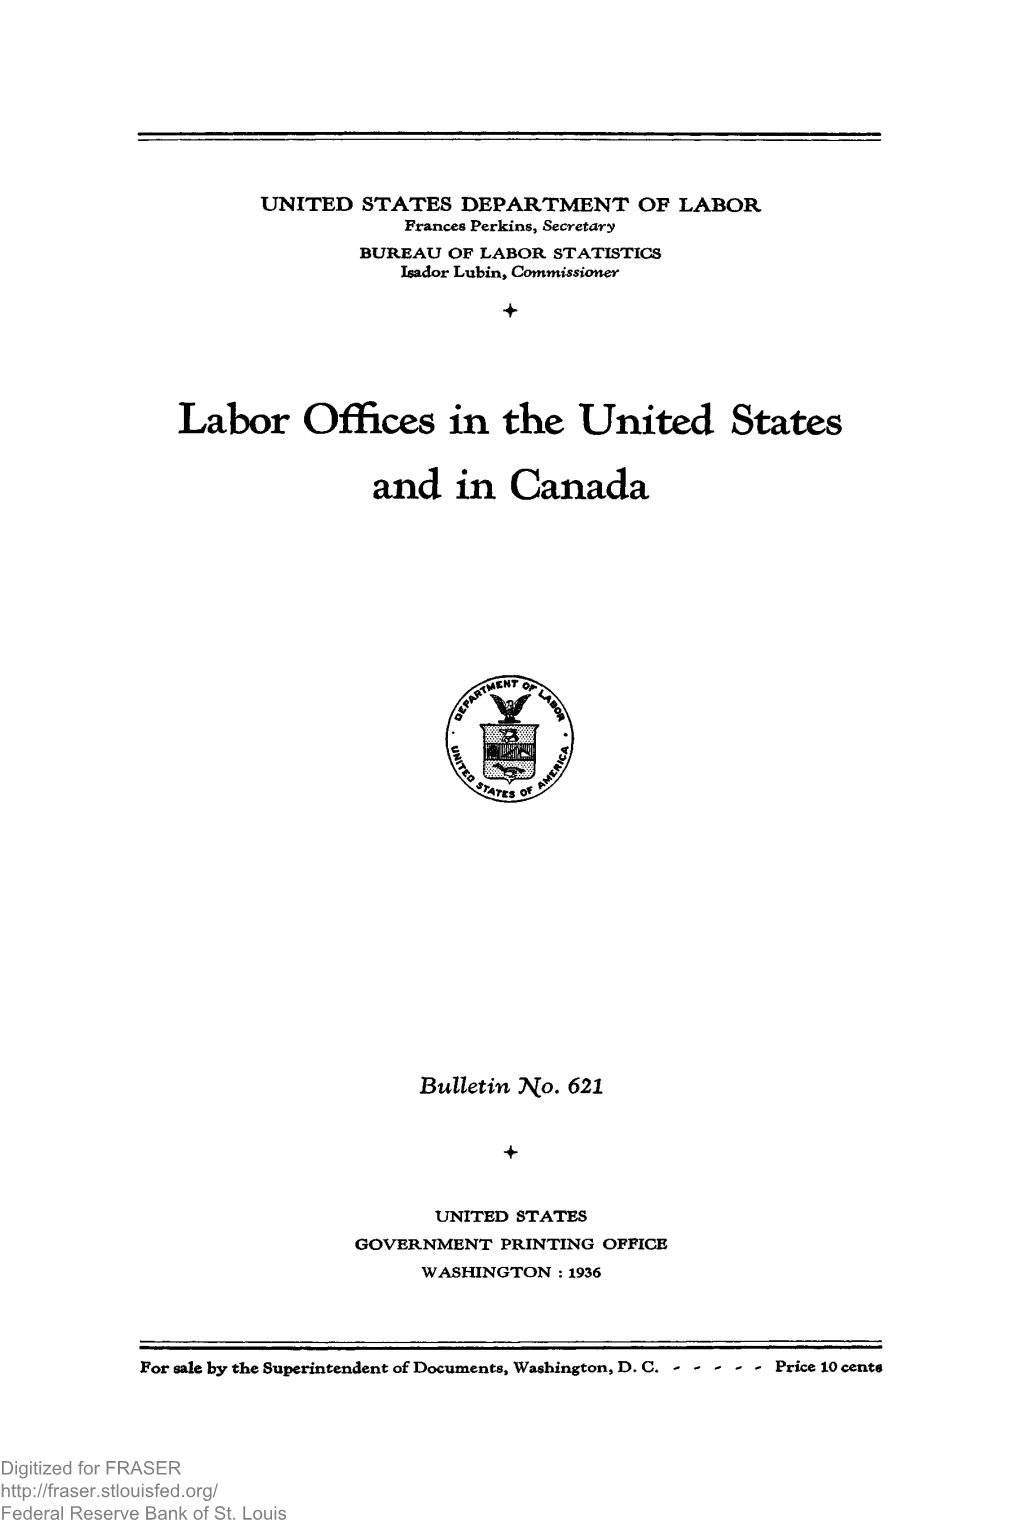 Labor Offices in the United States and in Canada